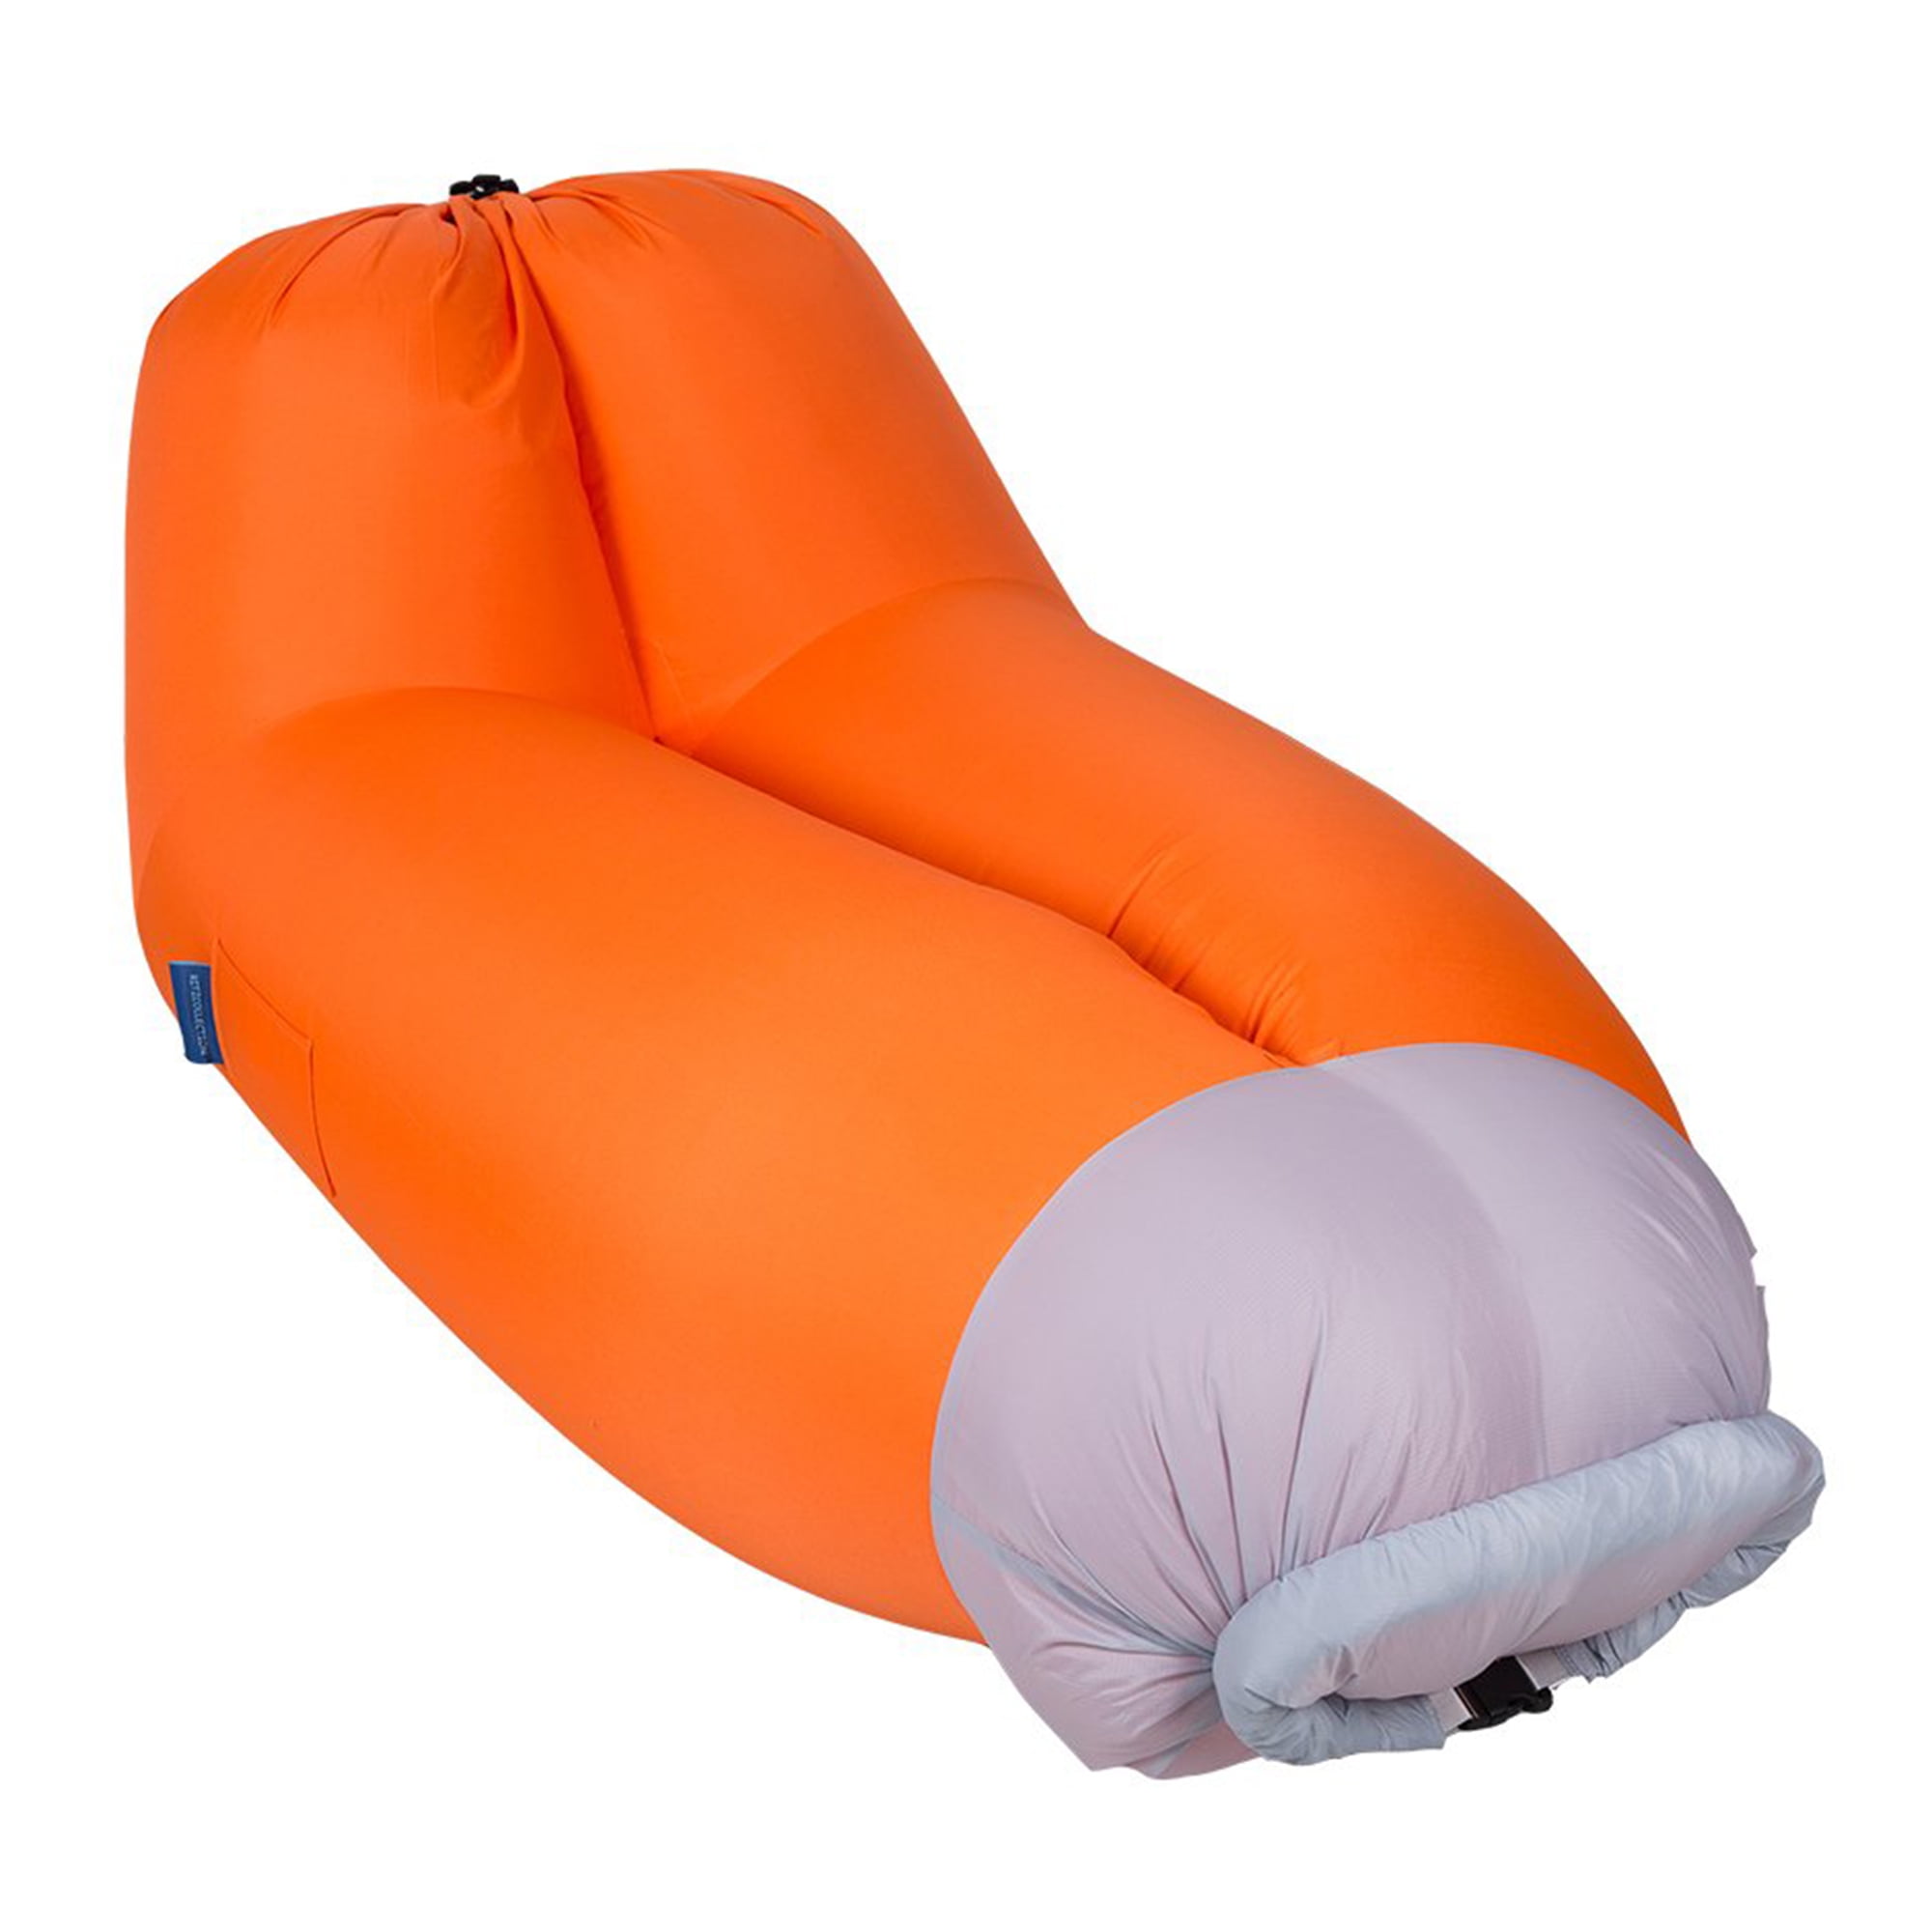 KARMAS PRODUCT Summer Outdoor Inflatable Lounger Seat Air